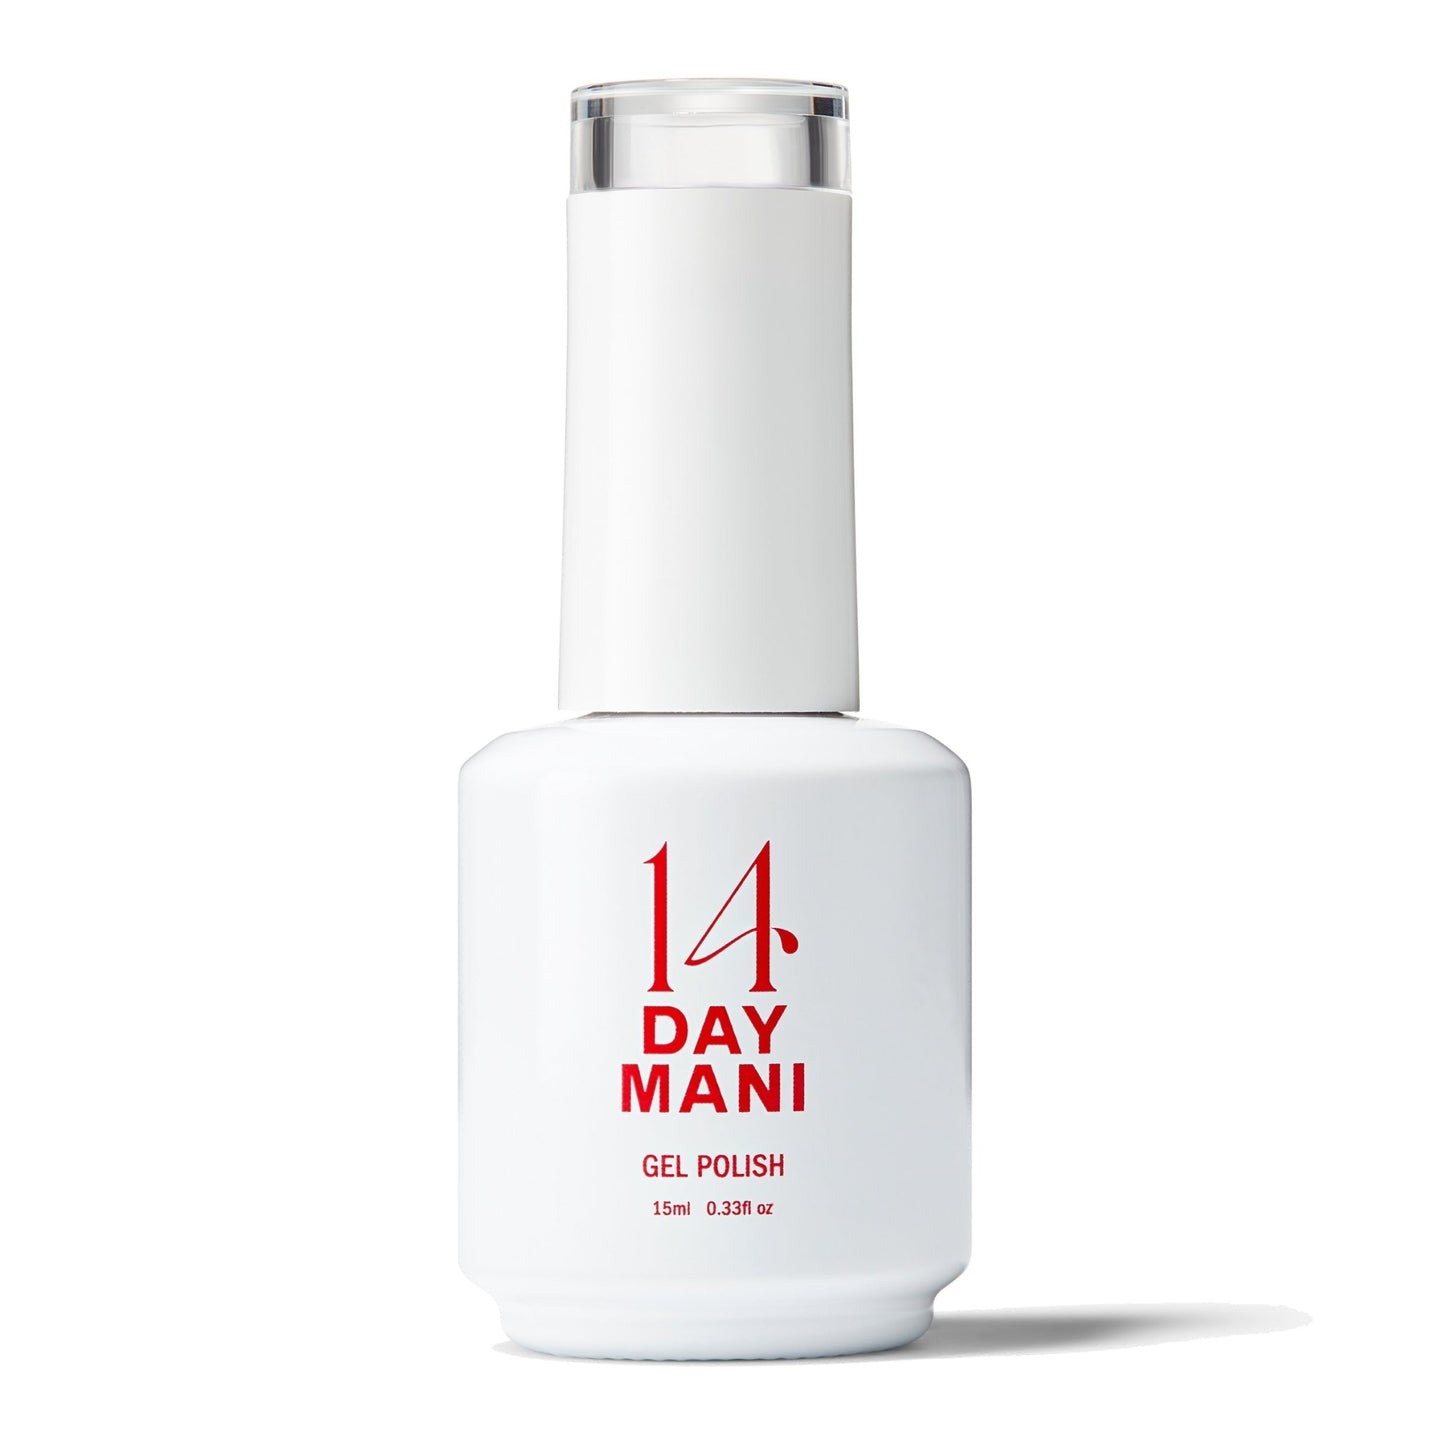 In-Dia Mood for Love - Gel Polish - 14 Day Manicure - Bottle 